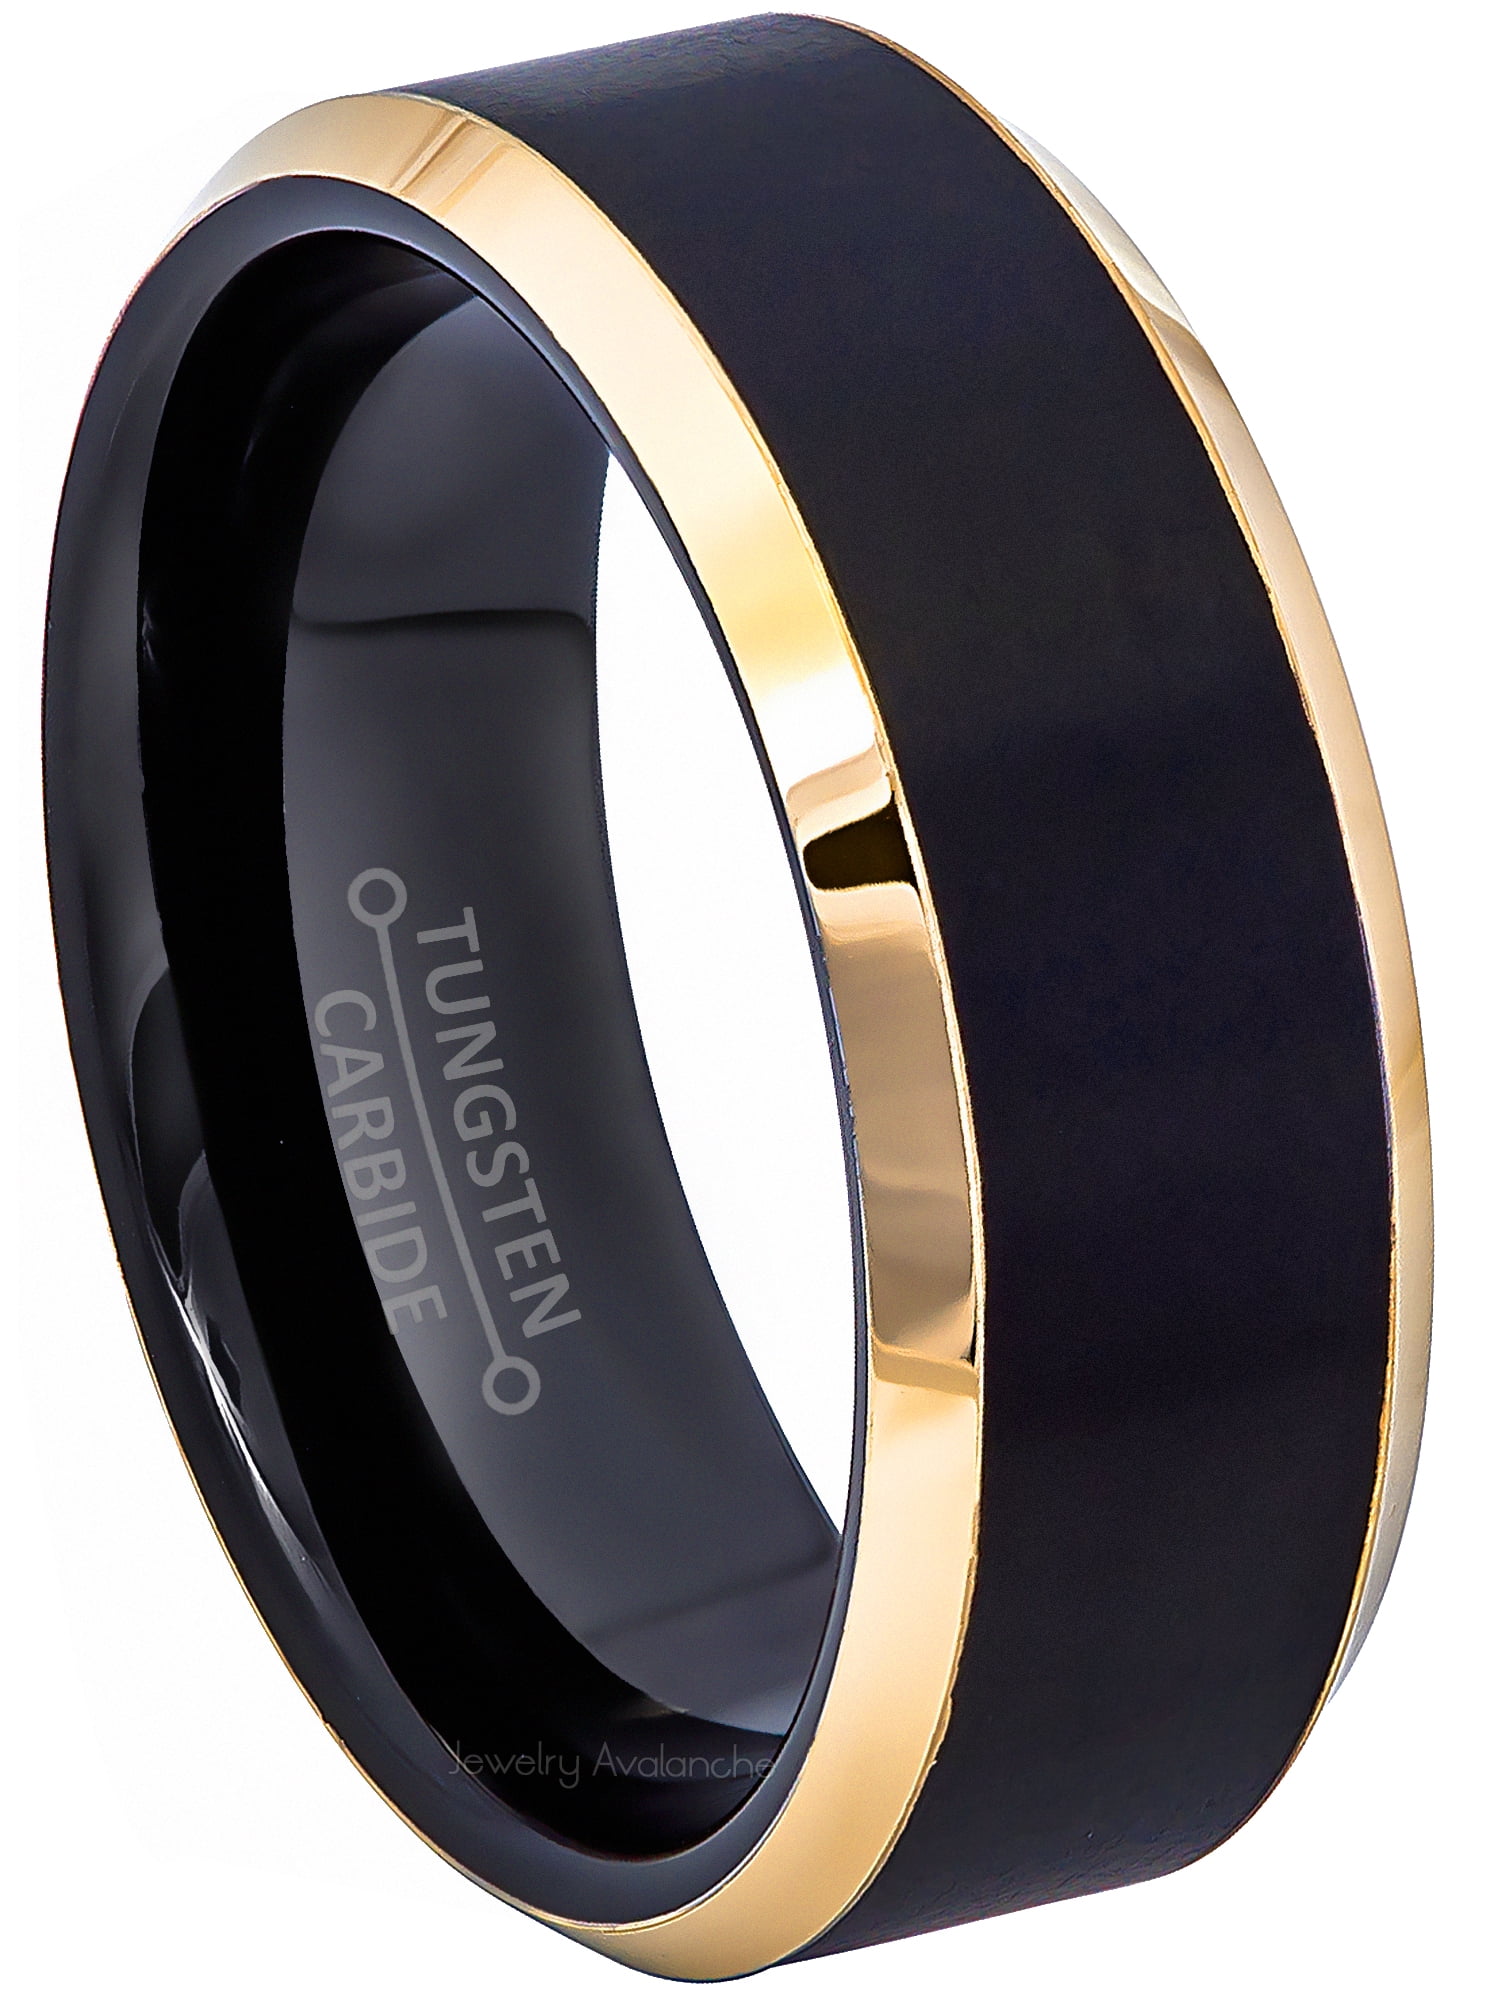 TwoBirch Men's Wedding Rings - 0.6 Ct. Black and White Stone Modern Three  Stone Men's Ring in Yellow Gold